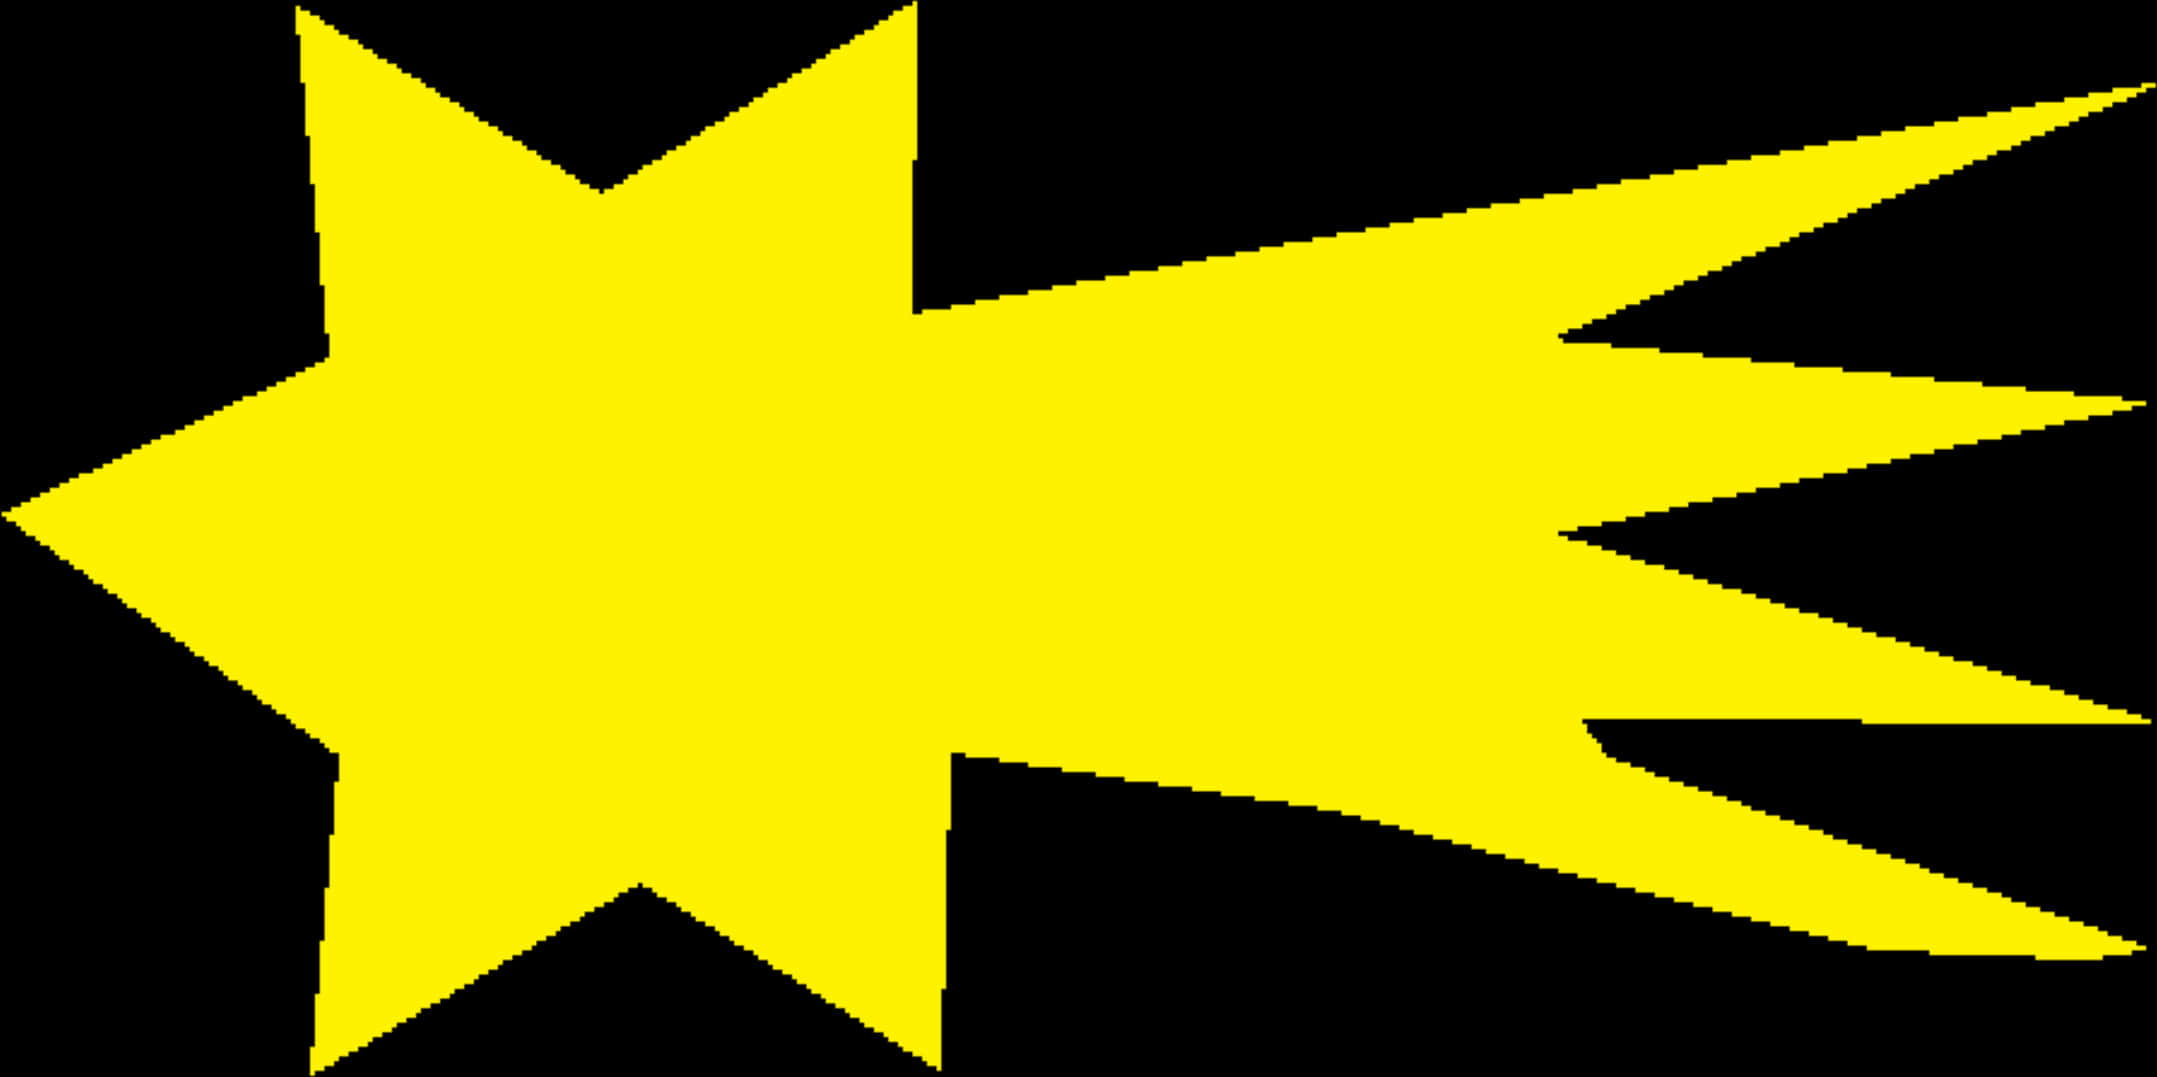 Yellow Shooting Star Graphic PNG